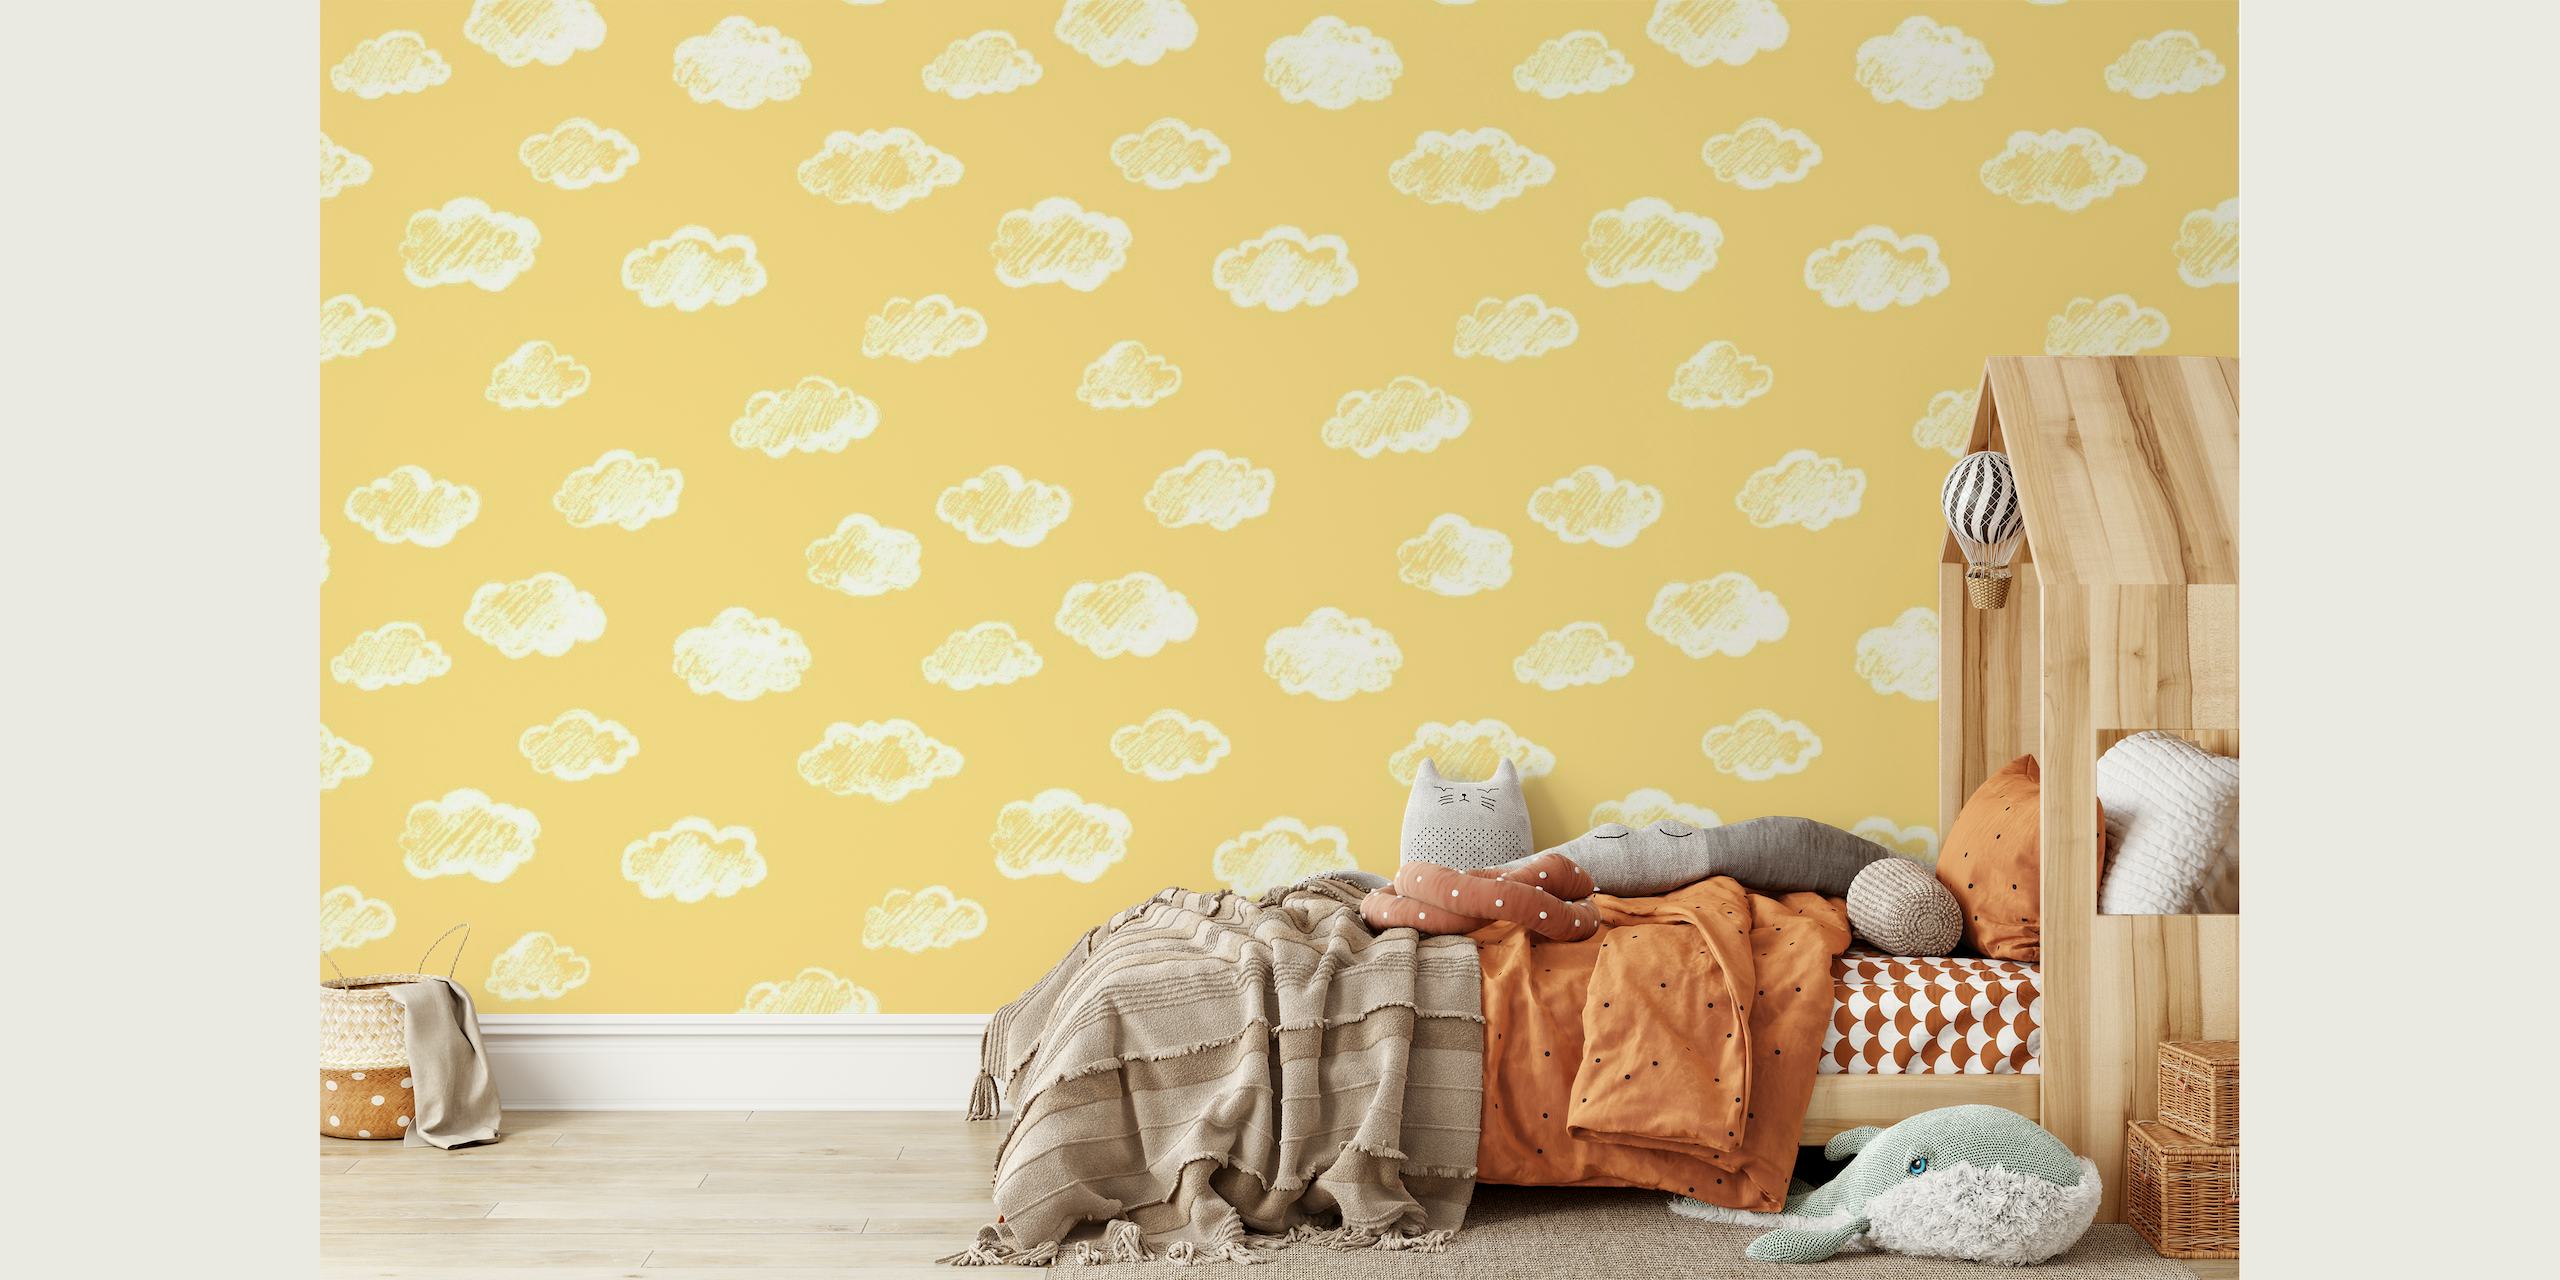 Chalk Clouds On Yellow behang